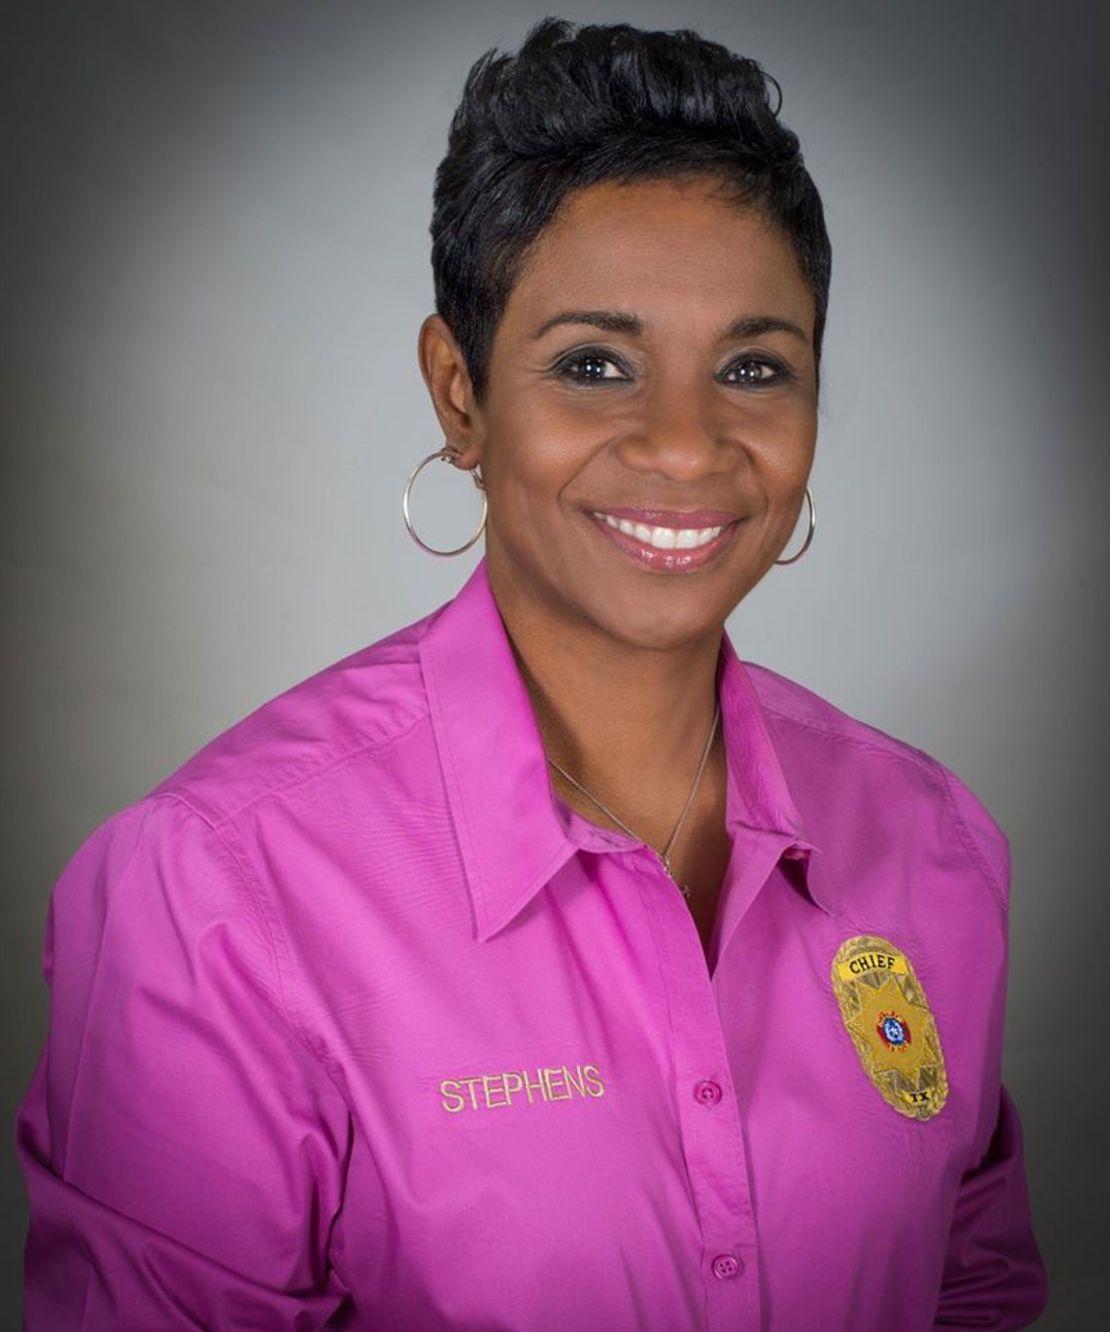 Zena Stephens became the first black female sheriff ever elected in the Lone Star State.